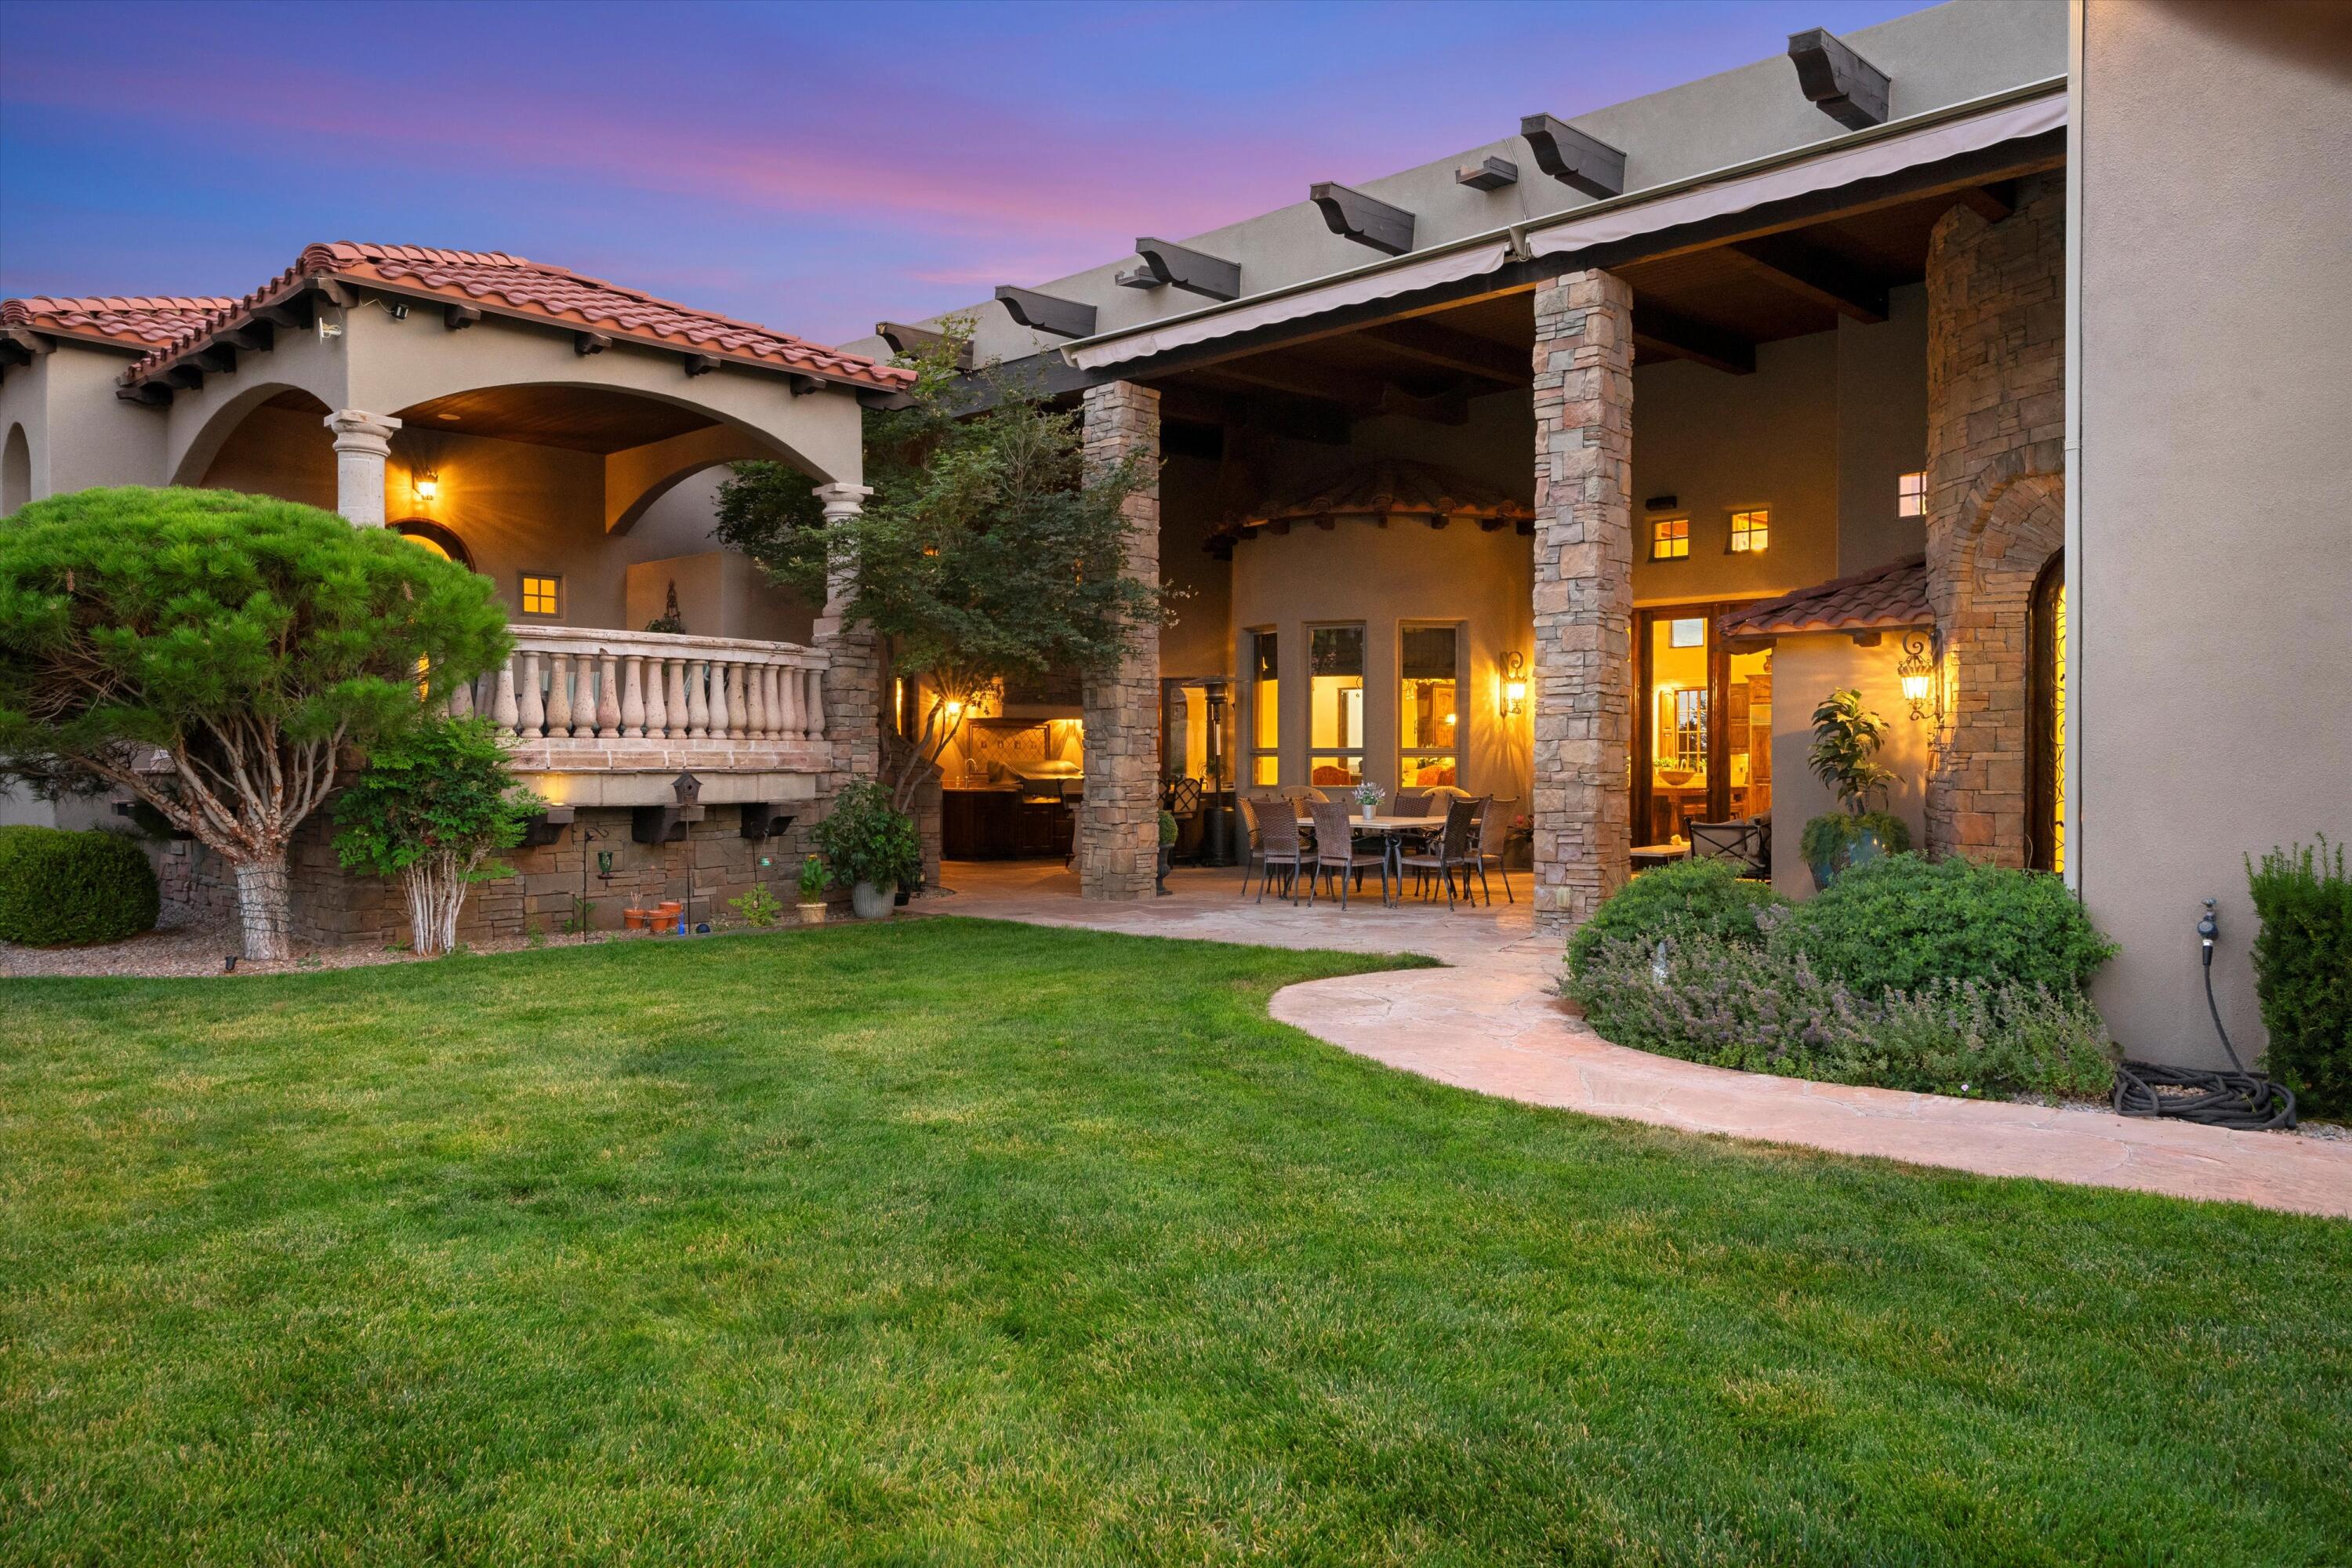 This timeless Tuscan estate is located in one of Albuquerque's most desirable areas, in a securely gated community, with fabulous views of the majestic Sandia Mountains. As you enter the home you are greeted by soaring ceilings with solid gable accents, Travertine floors, Cantera stone fireplaces, and custom hand-axed cabinets and doors. The kitchen is a chef's delight with a six burner Wolf stove, double ovens, and two built in dishwashers.  House contains a game room, movie theatre room, heated pool and outdoor kitchen.  6,822 Total SF | 5,550 SF main home,  4 bedrooms, 6 bathrooms (each bedroom has an ensuite and walk-in closet) 3 car garage | 1,052 SF casita with 1 bedroom, 1 bathroom and 2 car garage | 220 SF Pool House,